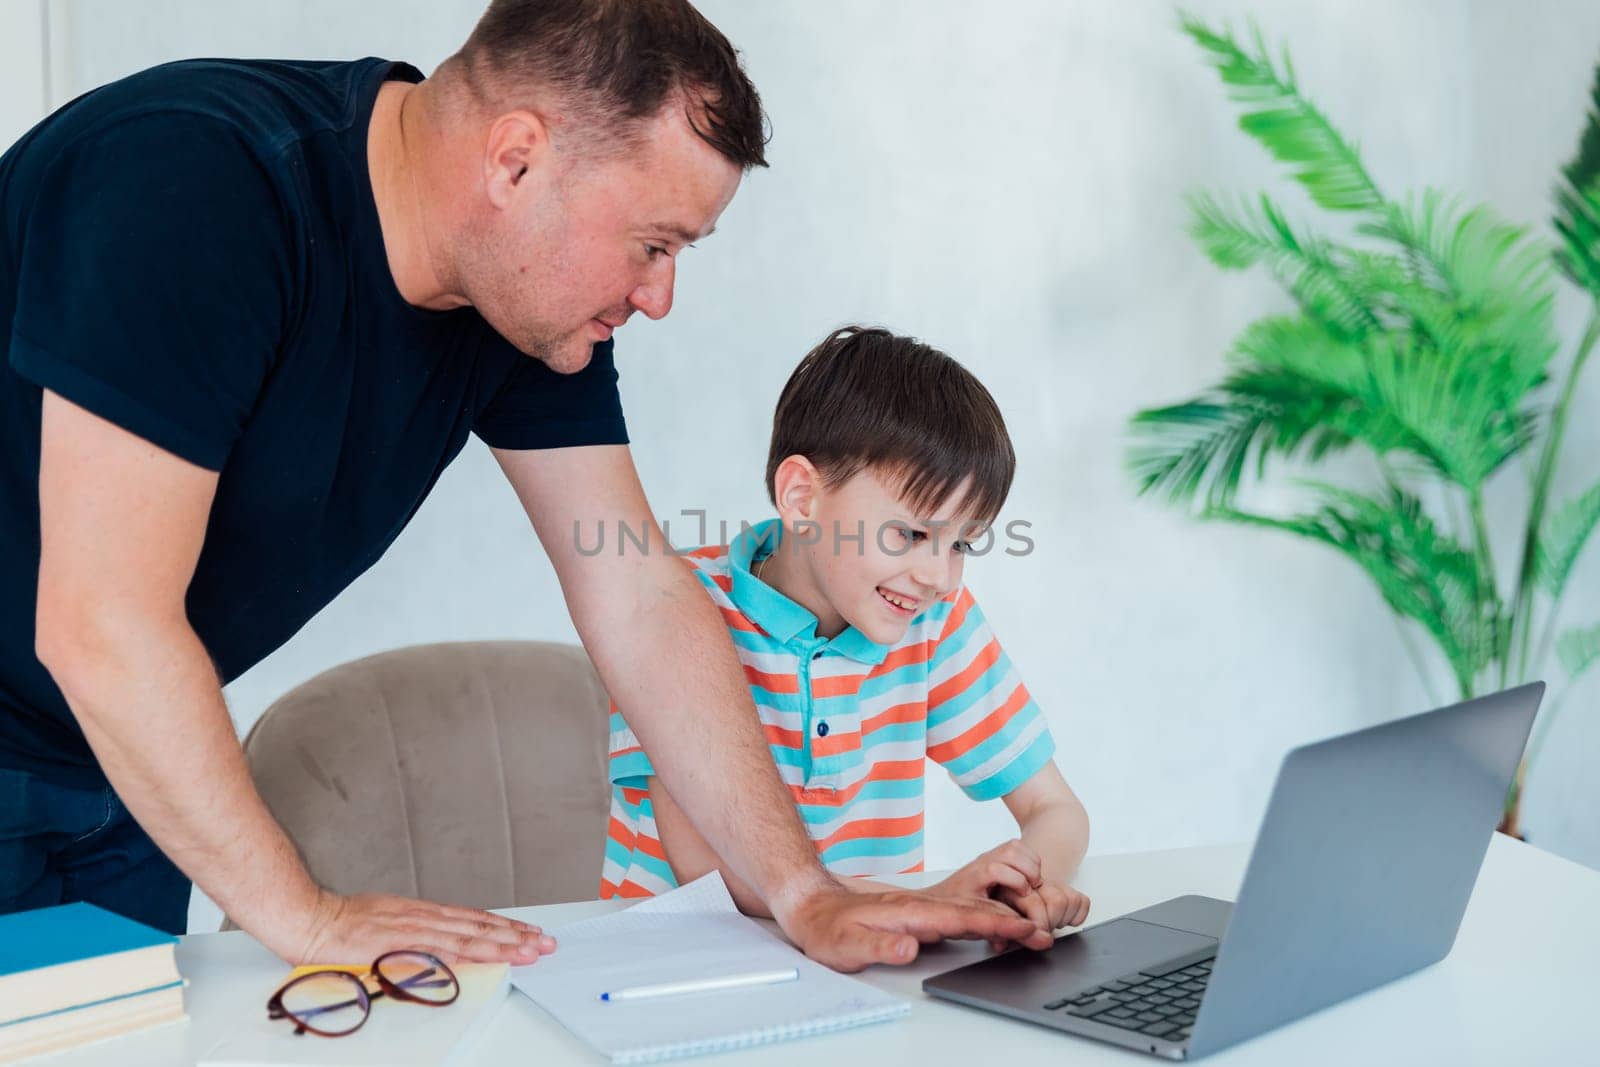 Man helping child studying at computer class